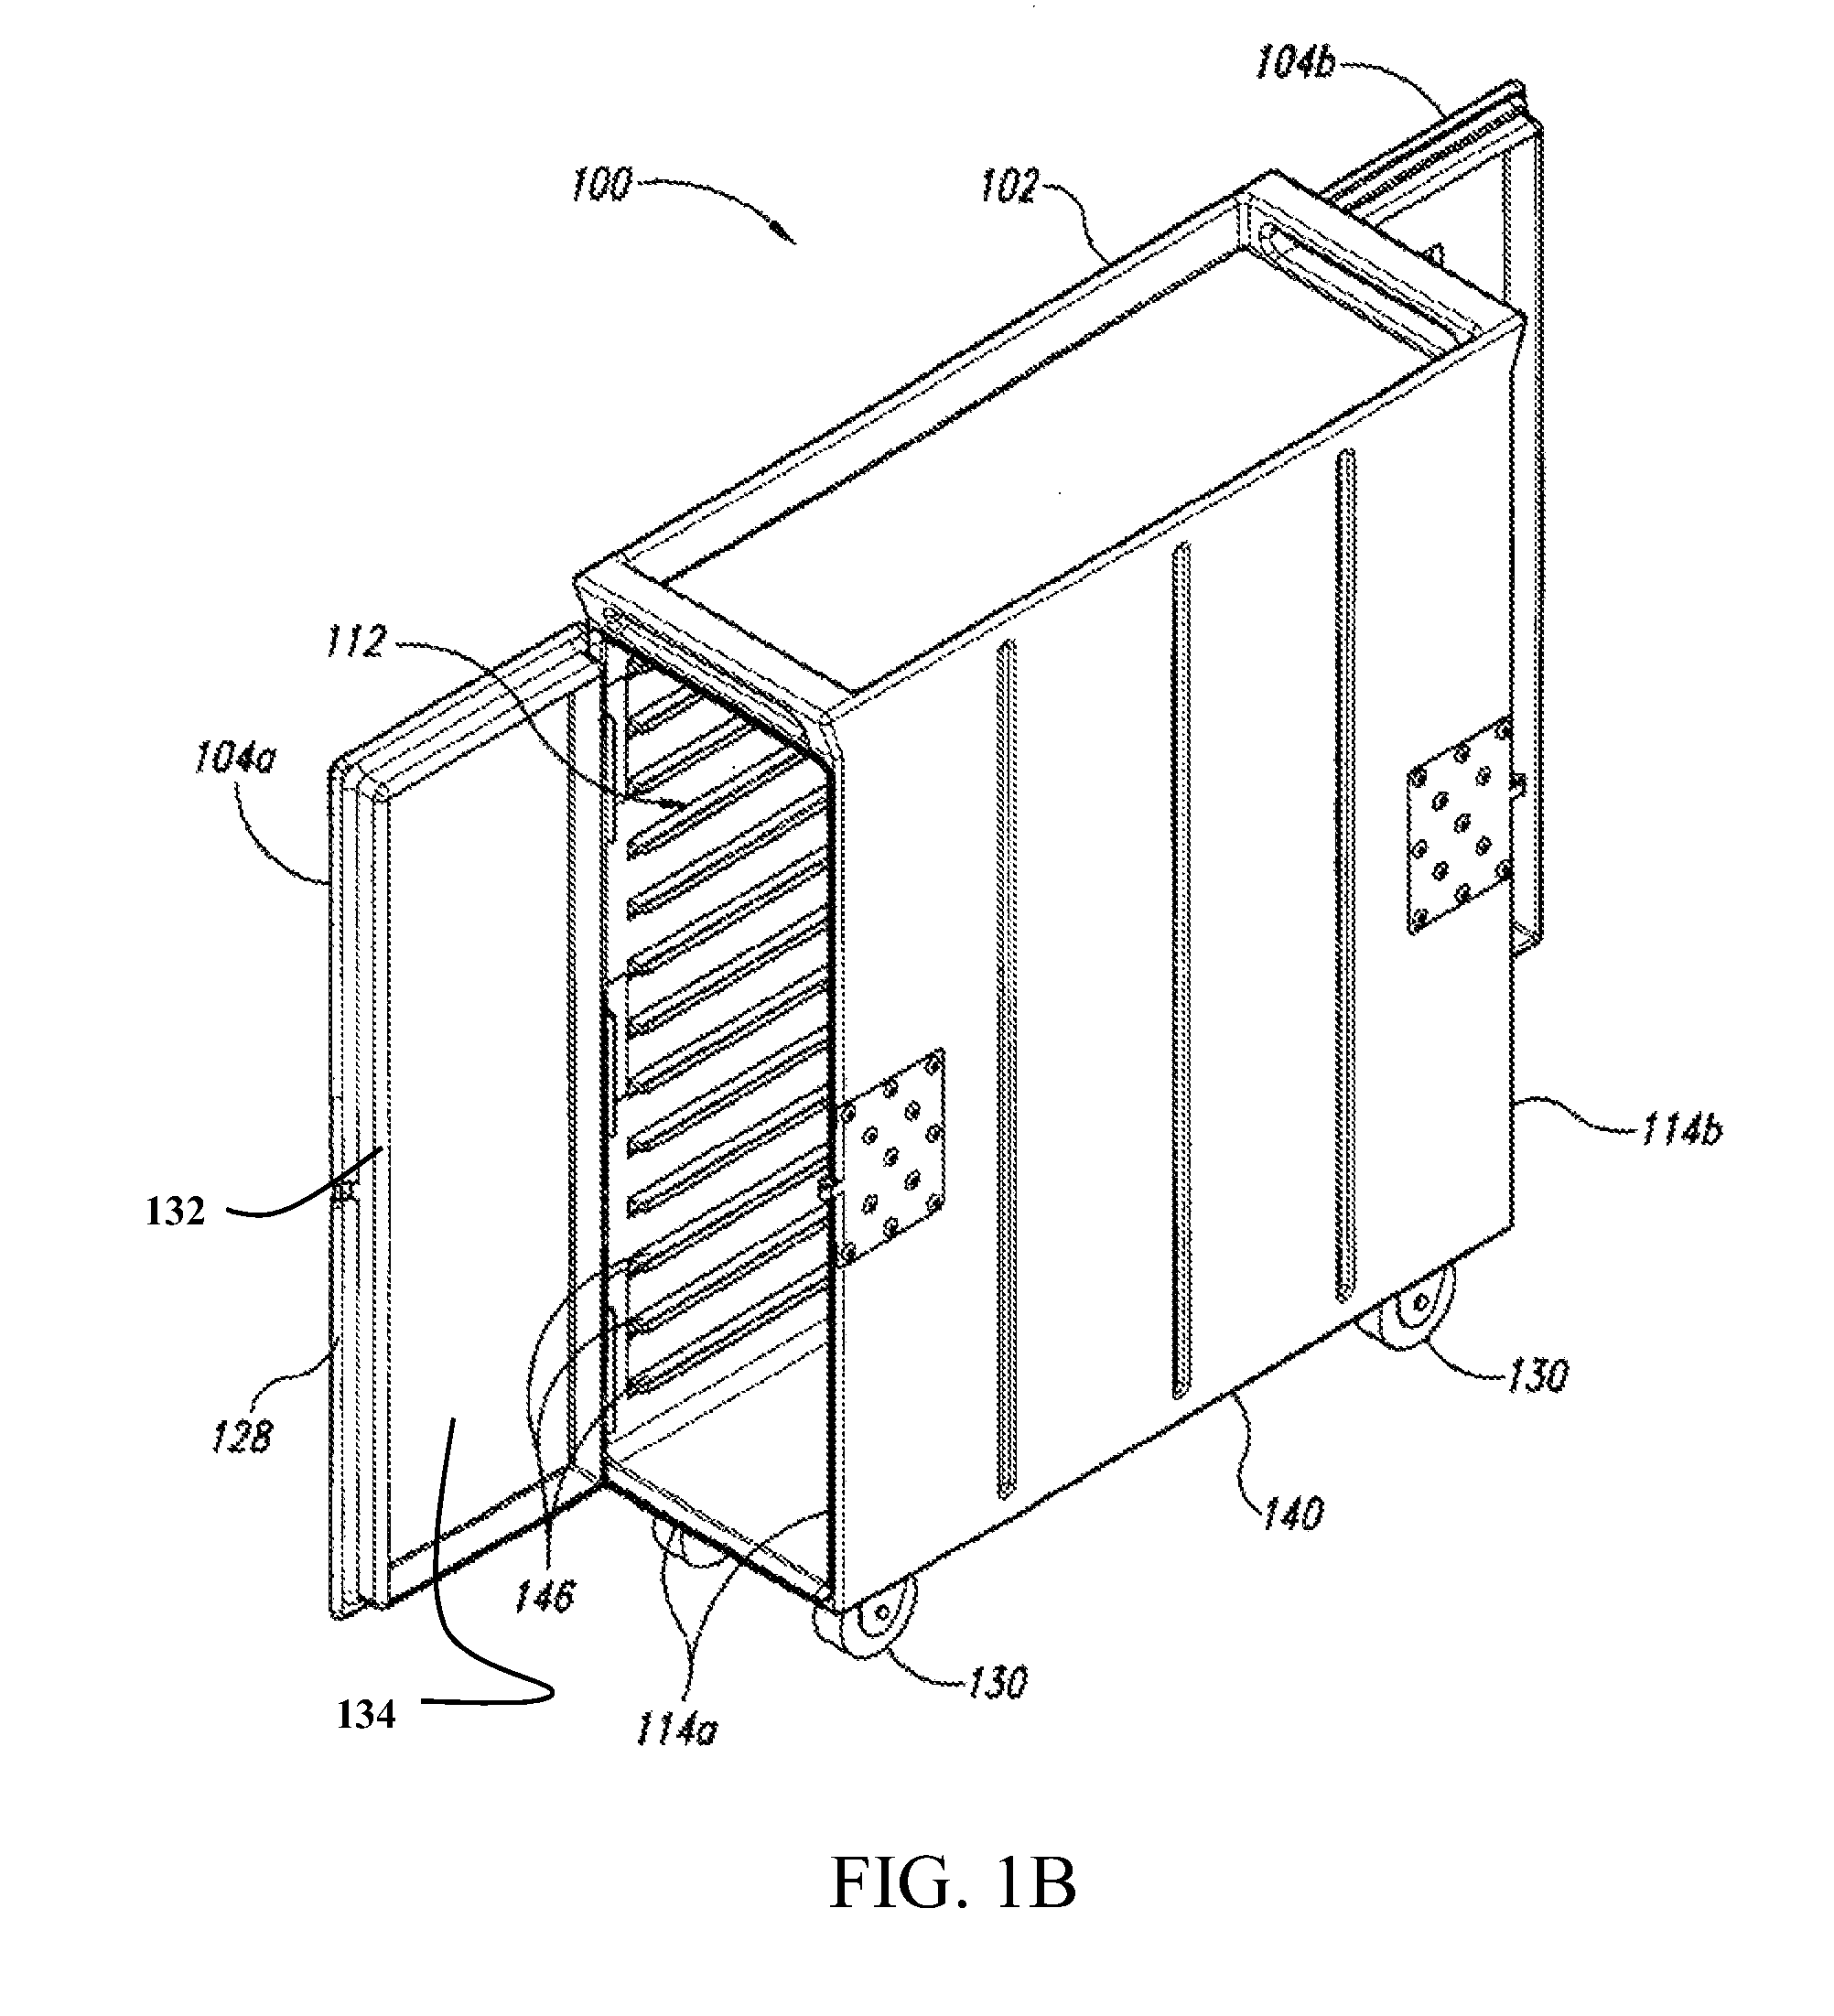 Vertically mounted dry ice cooling compartment applied to a galley cart for temperature gradient reduction